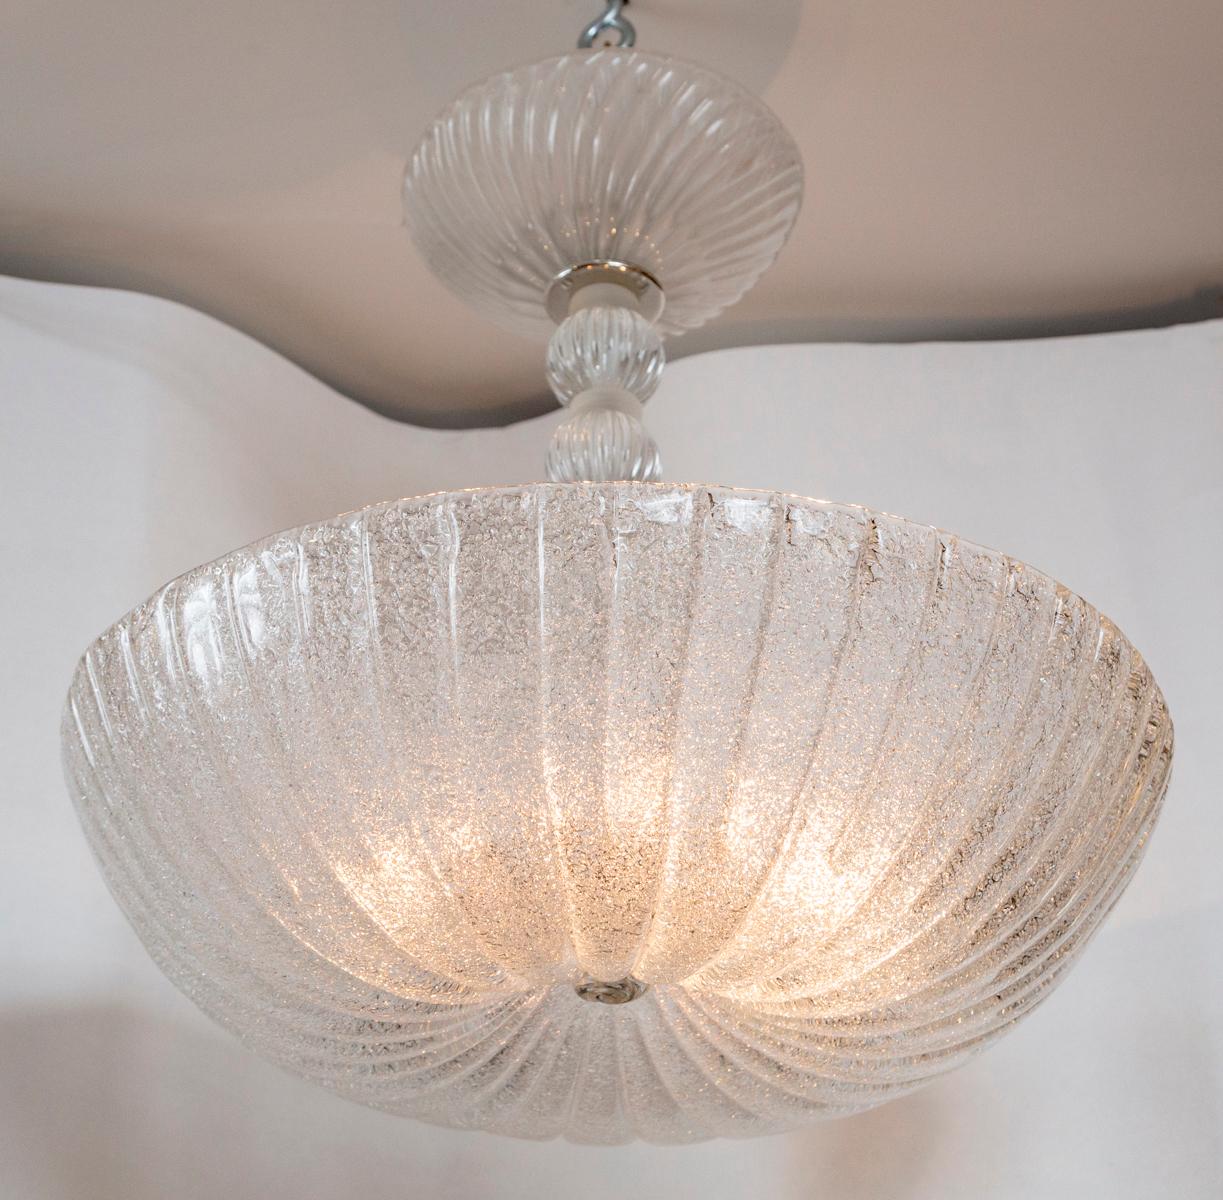 Frosted Murano glass blown semi flushmout/pendant dome-shaped ceiling fixture, stem composed of four clear glass balls and a large opaque swirl blown ceiling canopy. This nickel fixture is engineered for the canopy to install directly flush to the